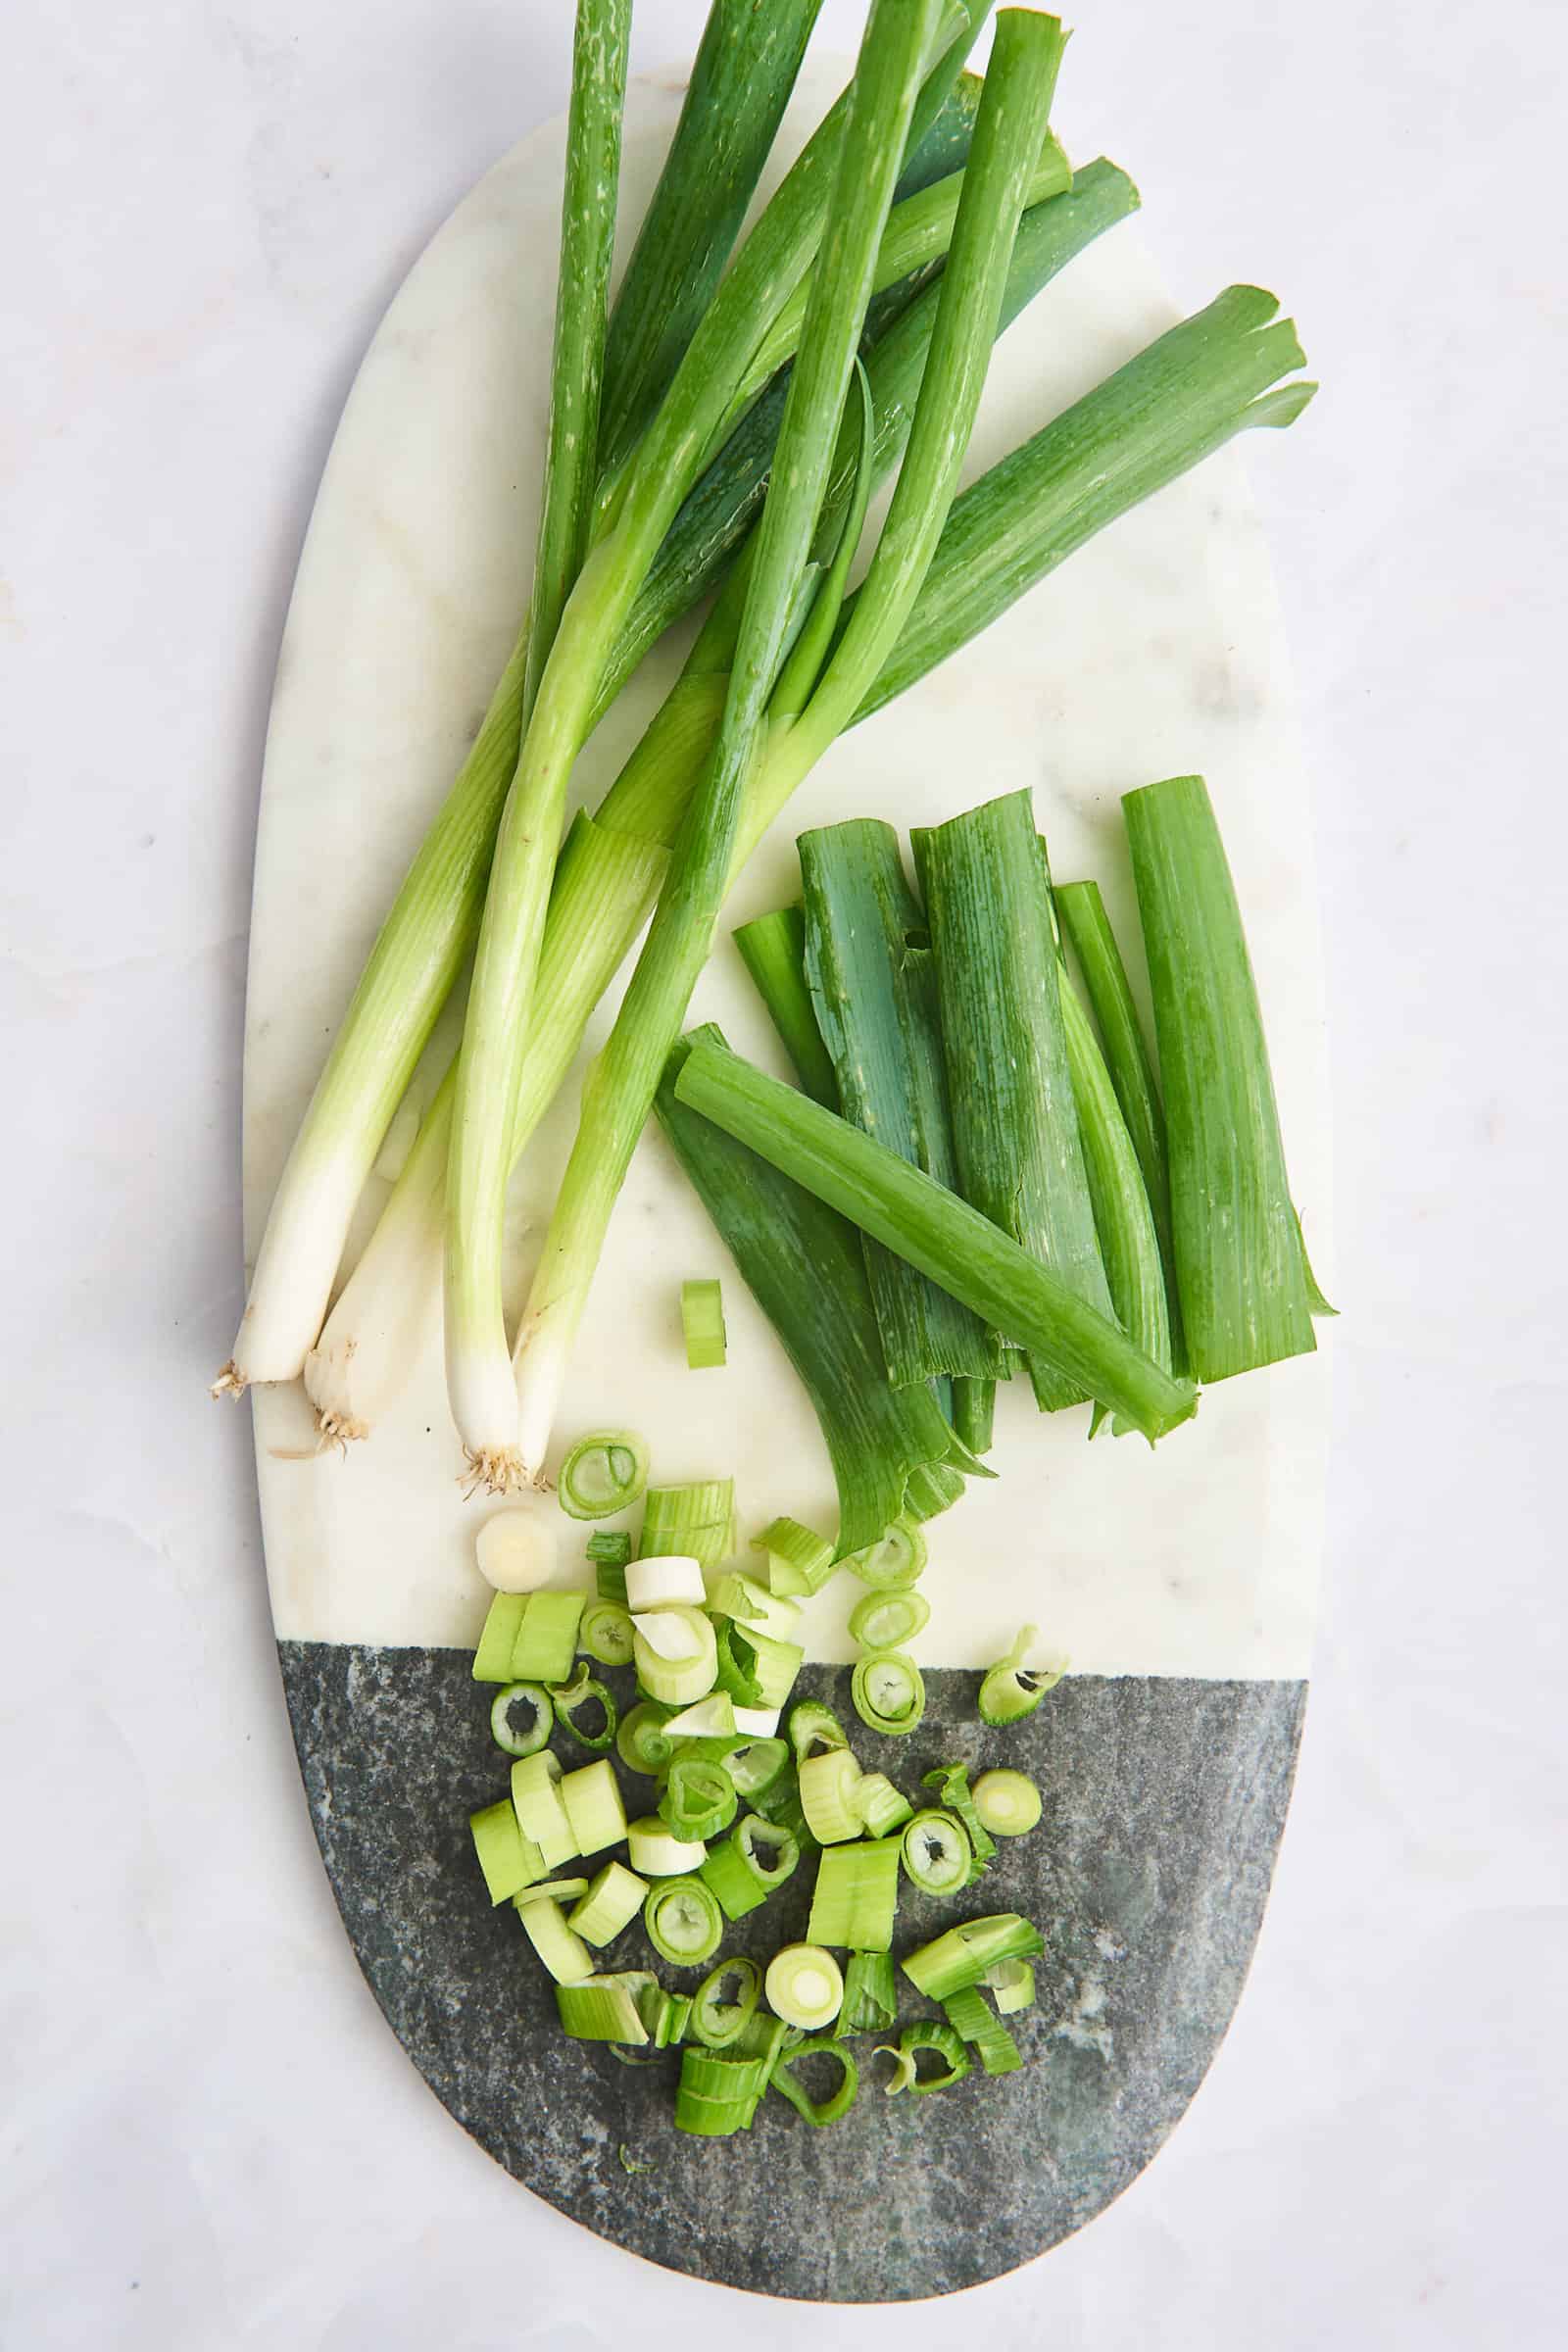 A cutting board with chopped green onions and halved green onions.